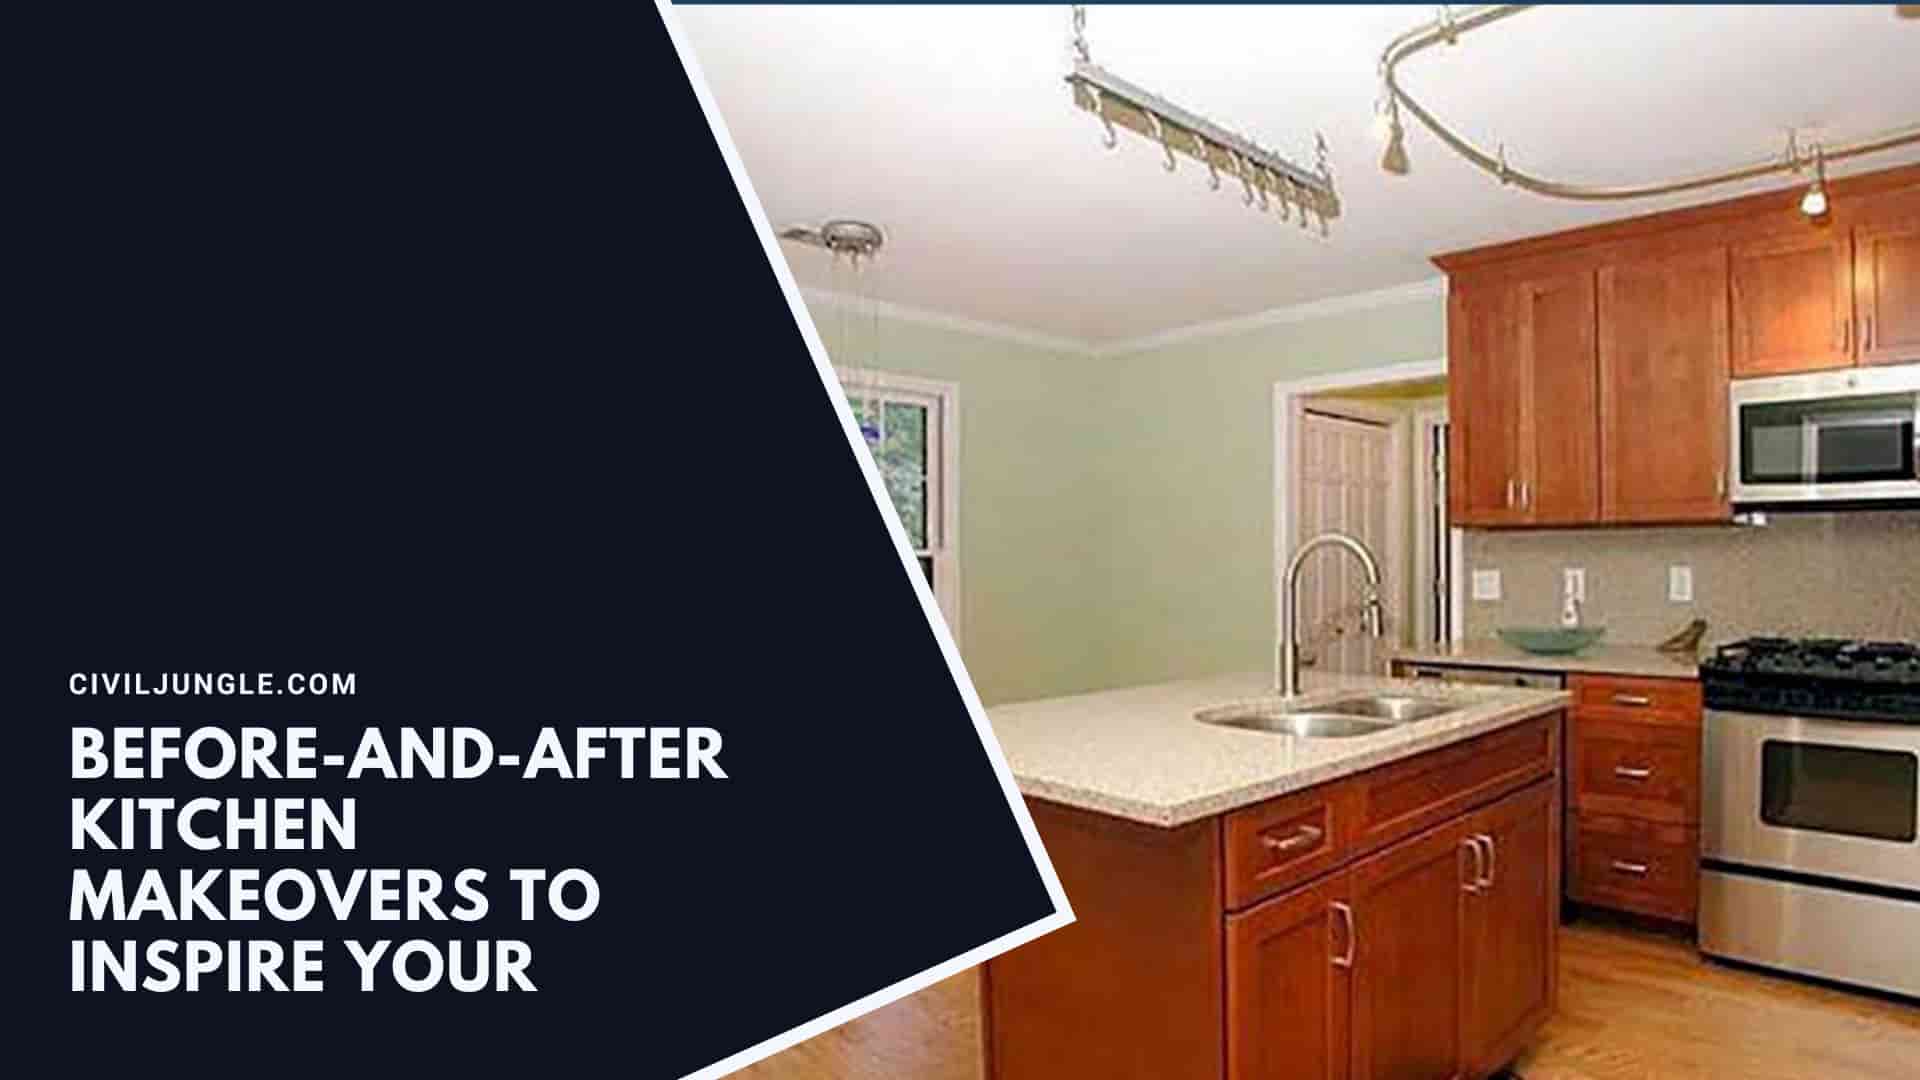 Before-and-After Kitchen Makeovers to Inspire Your